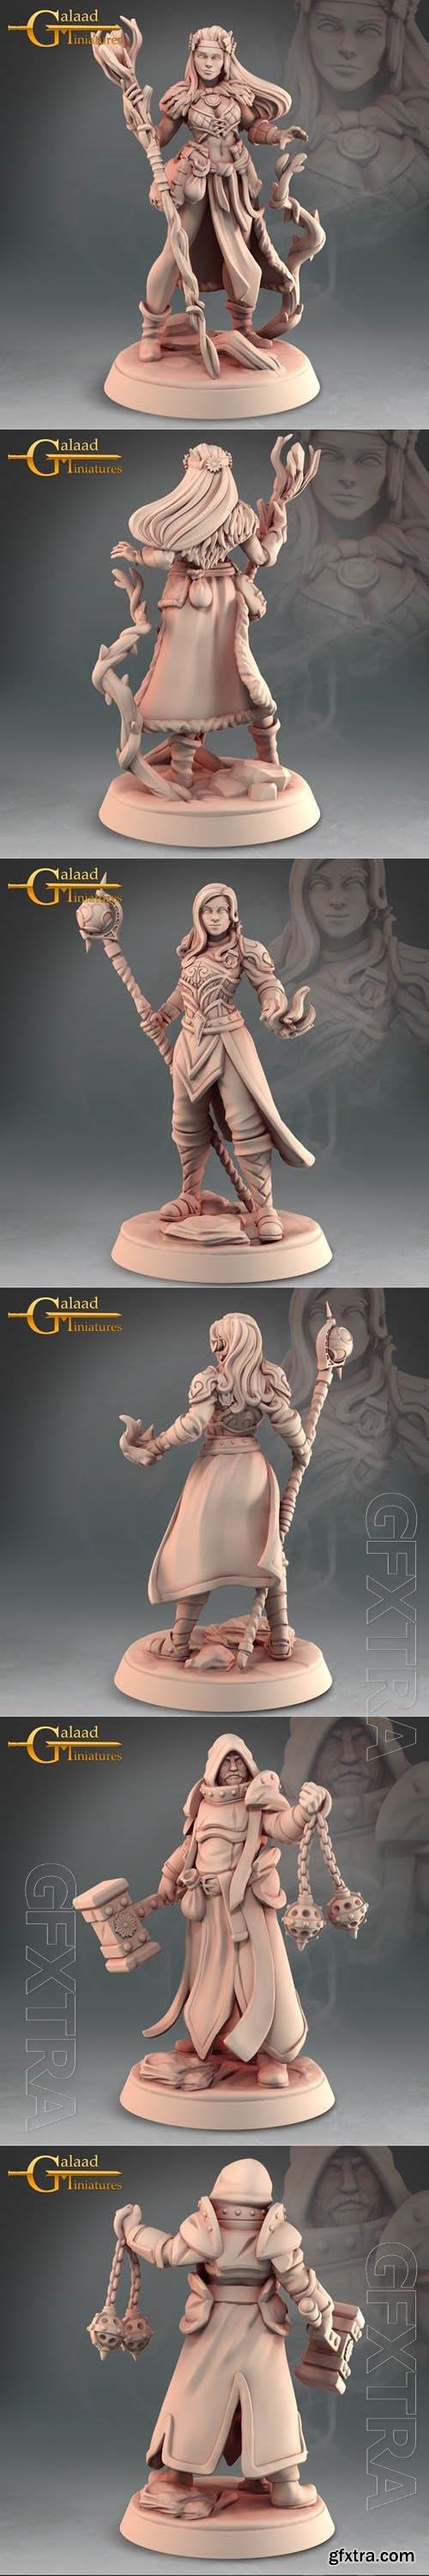 Into The Woods - Heroes 3D Print